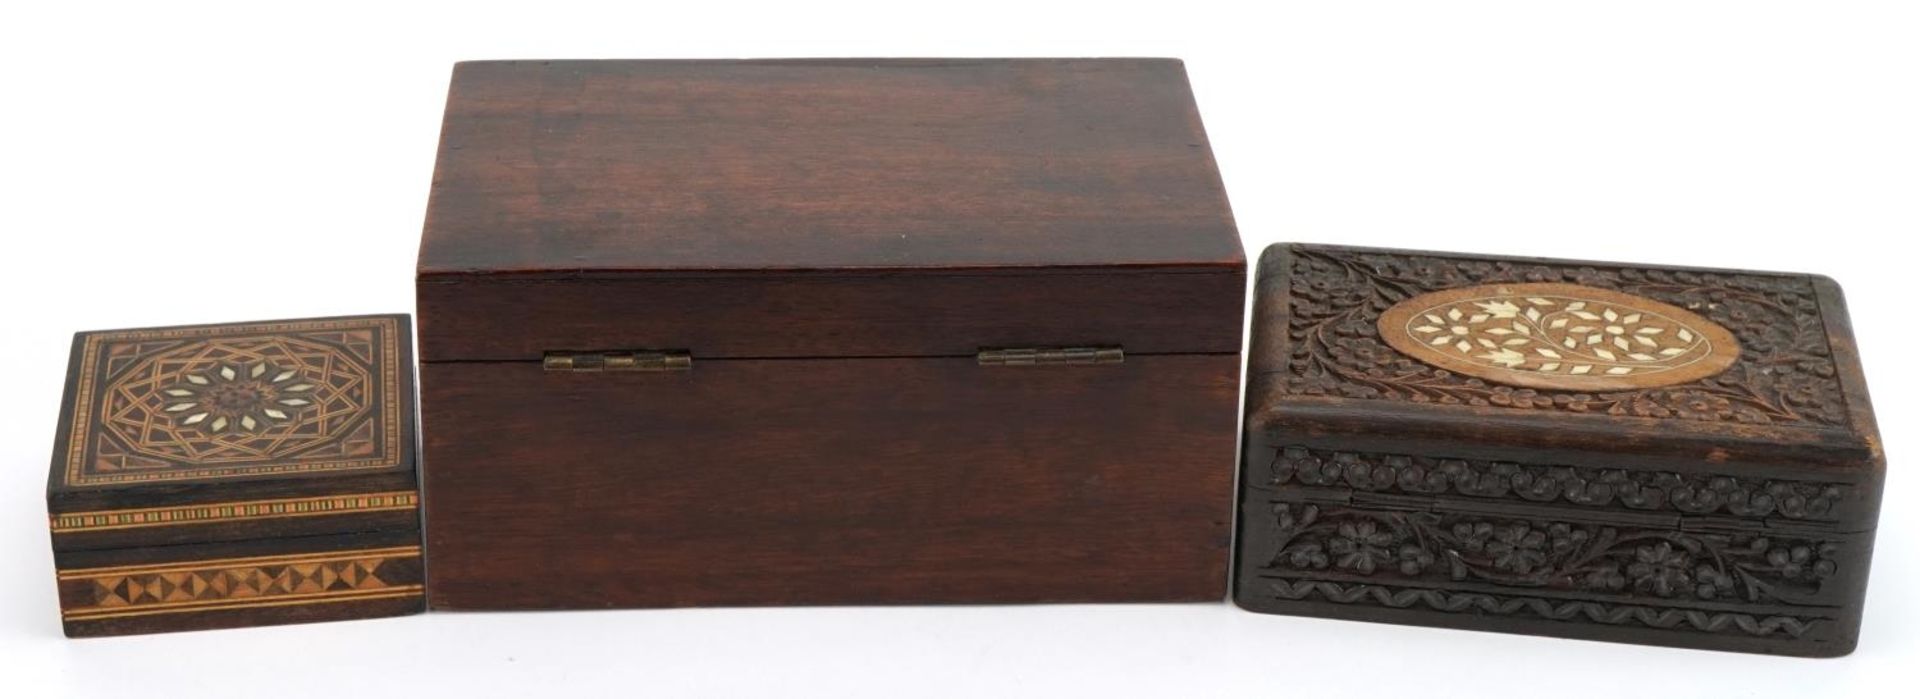 Woodenware including an Anglo Indian box carved with flowers and a Moorish style inlaid box, the - Bild 3 aus 4